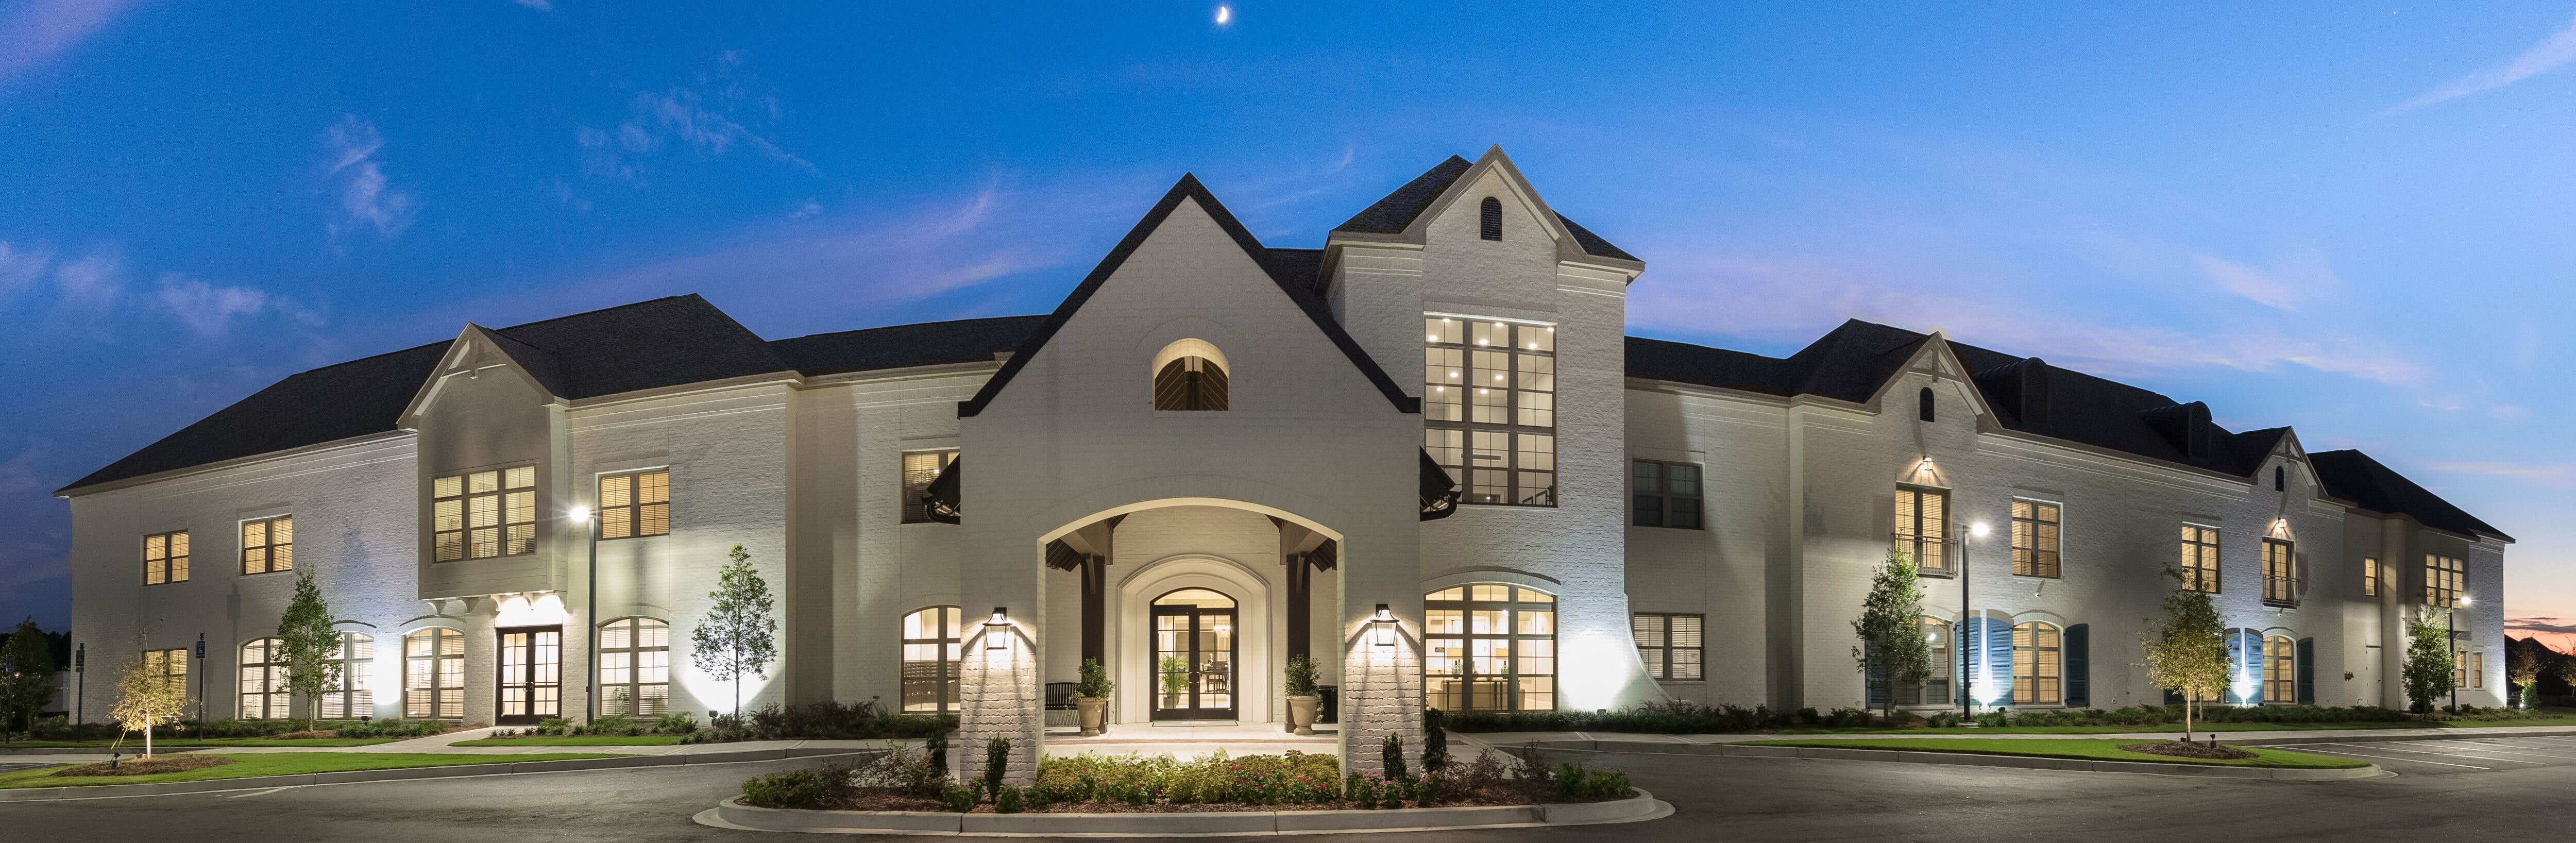 The Blake at Carnes Crossroads community exterior